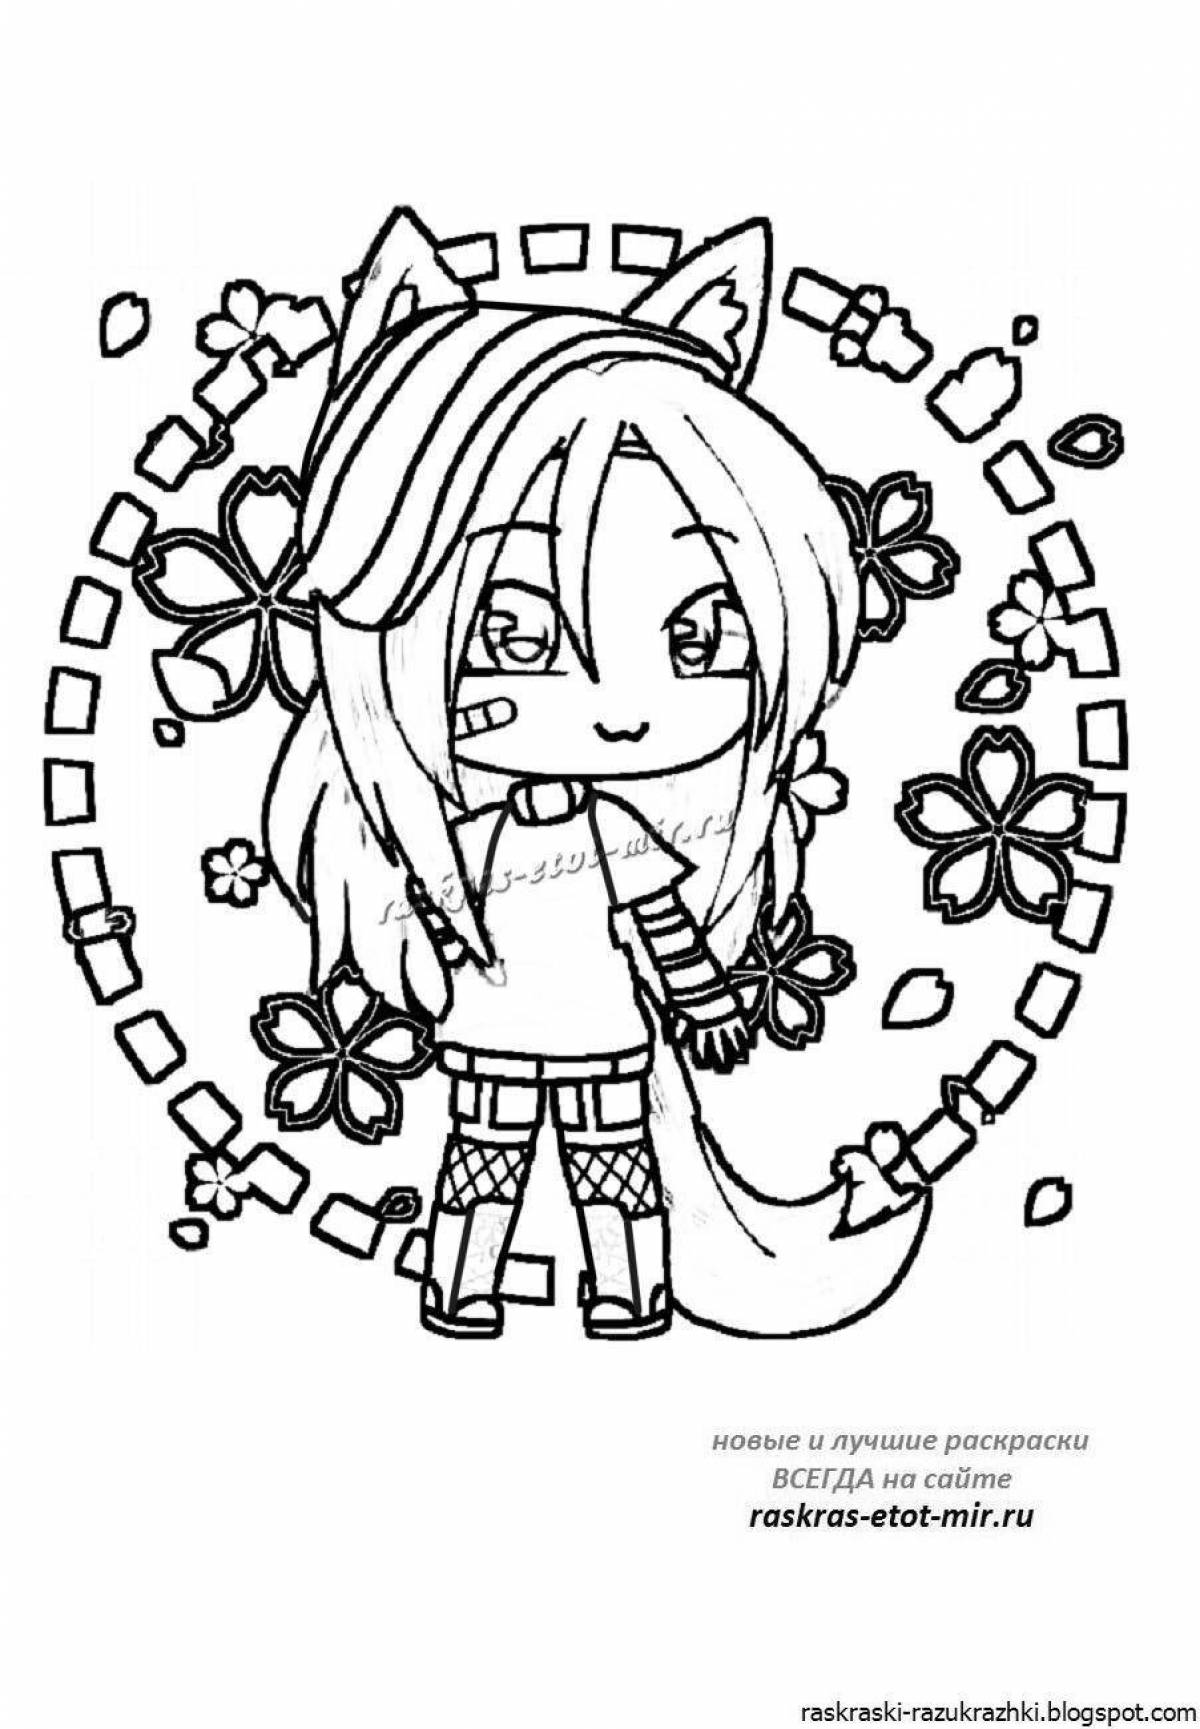 Gacha life coloring book with color theme